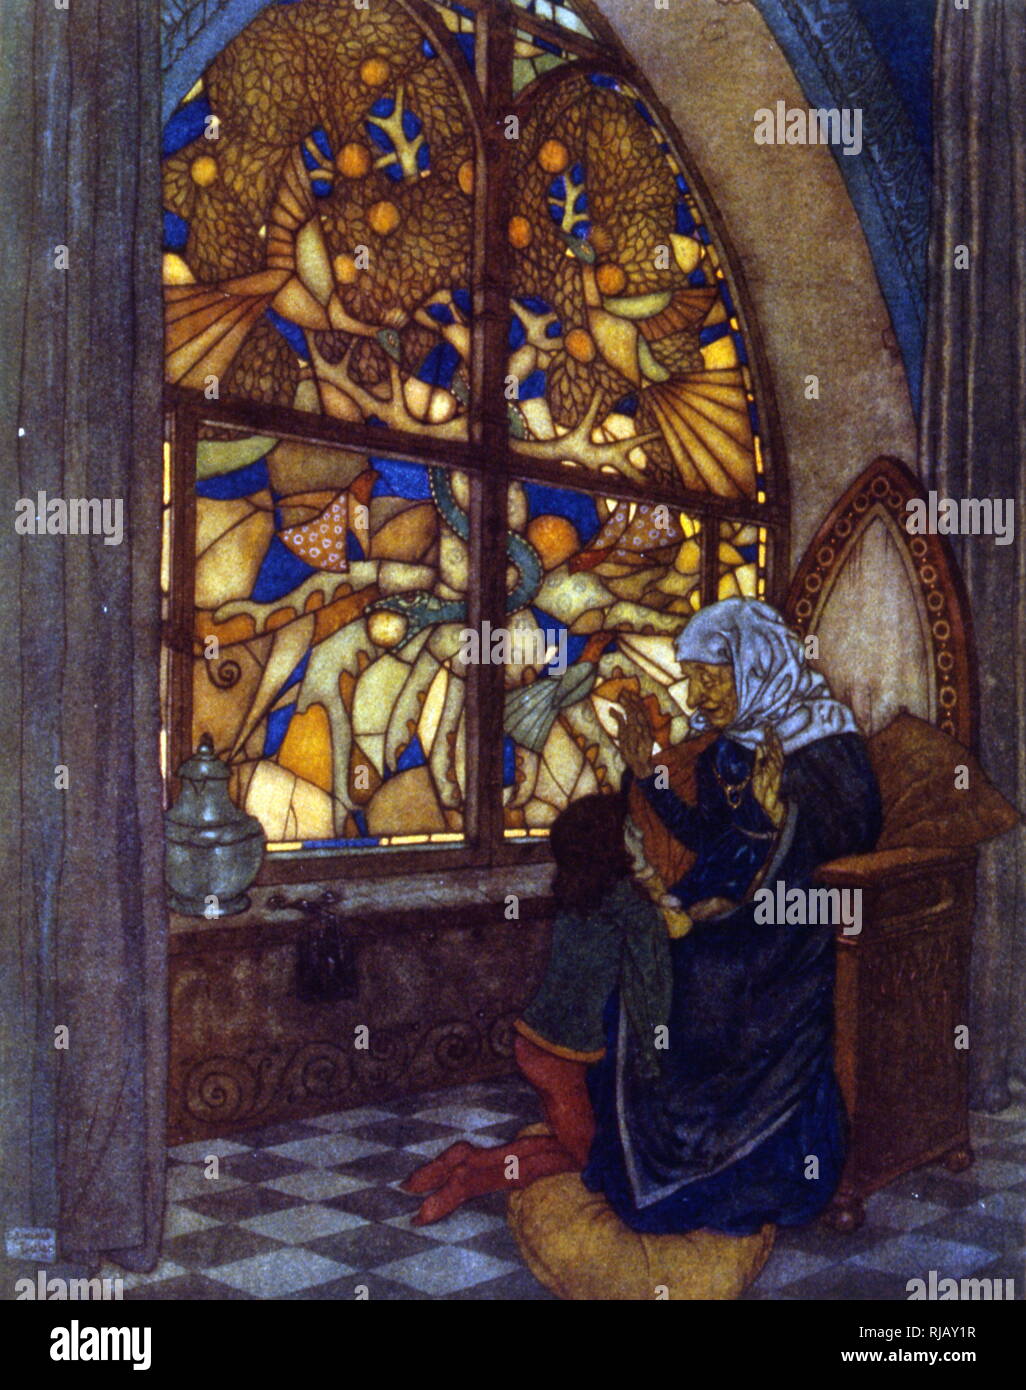 Illustration showing a medieval old woman behind a stained glass window 1895 Stock Photo